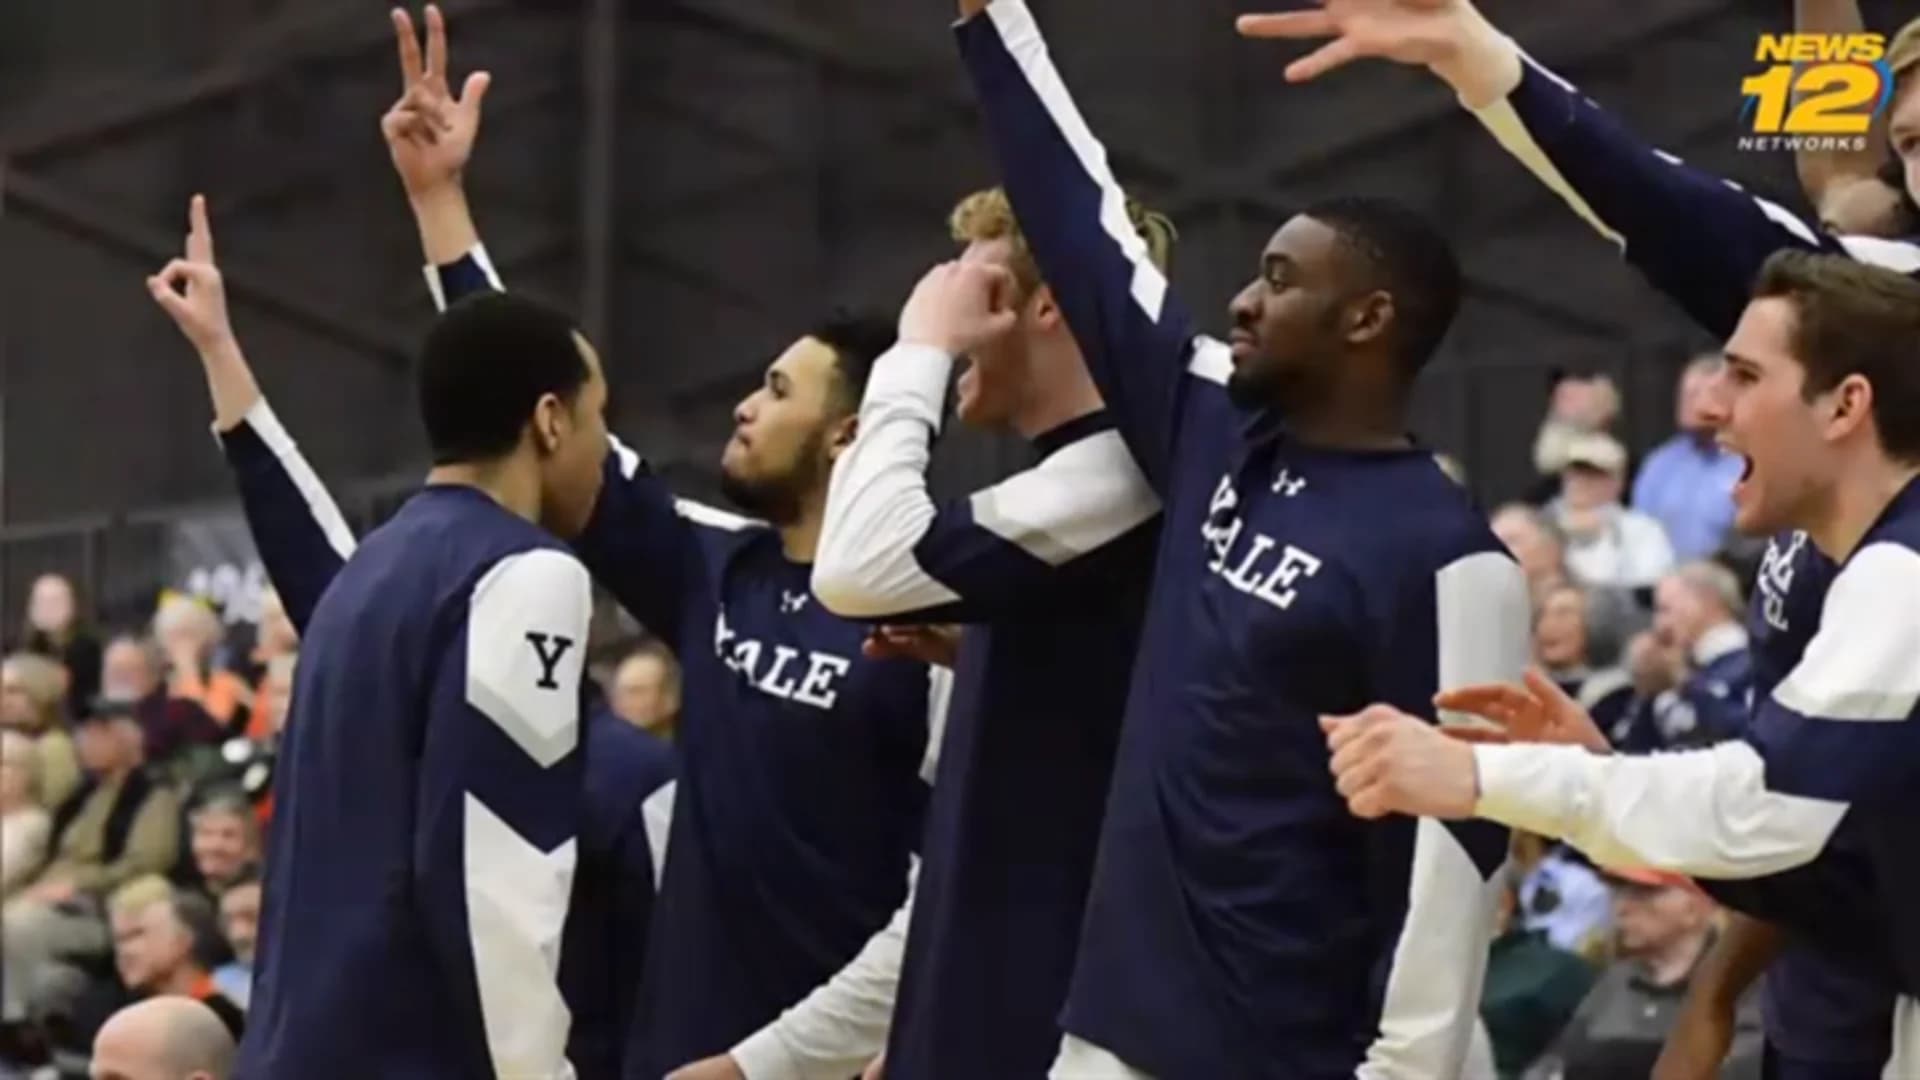 Yale hopes for another upset as CT's lone NCAA Tournament representative